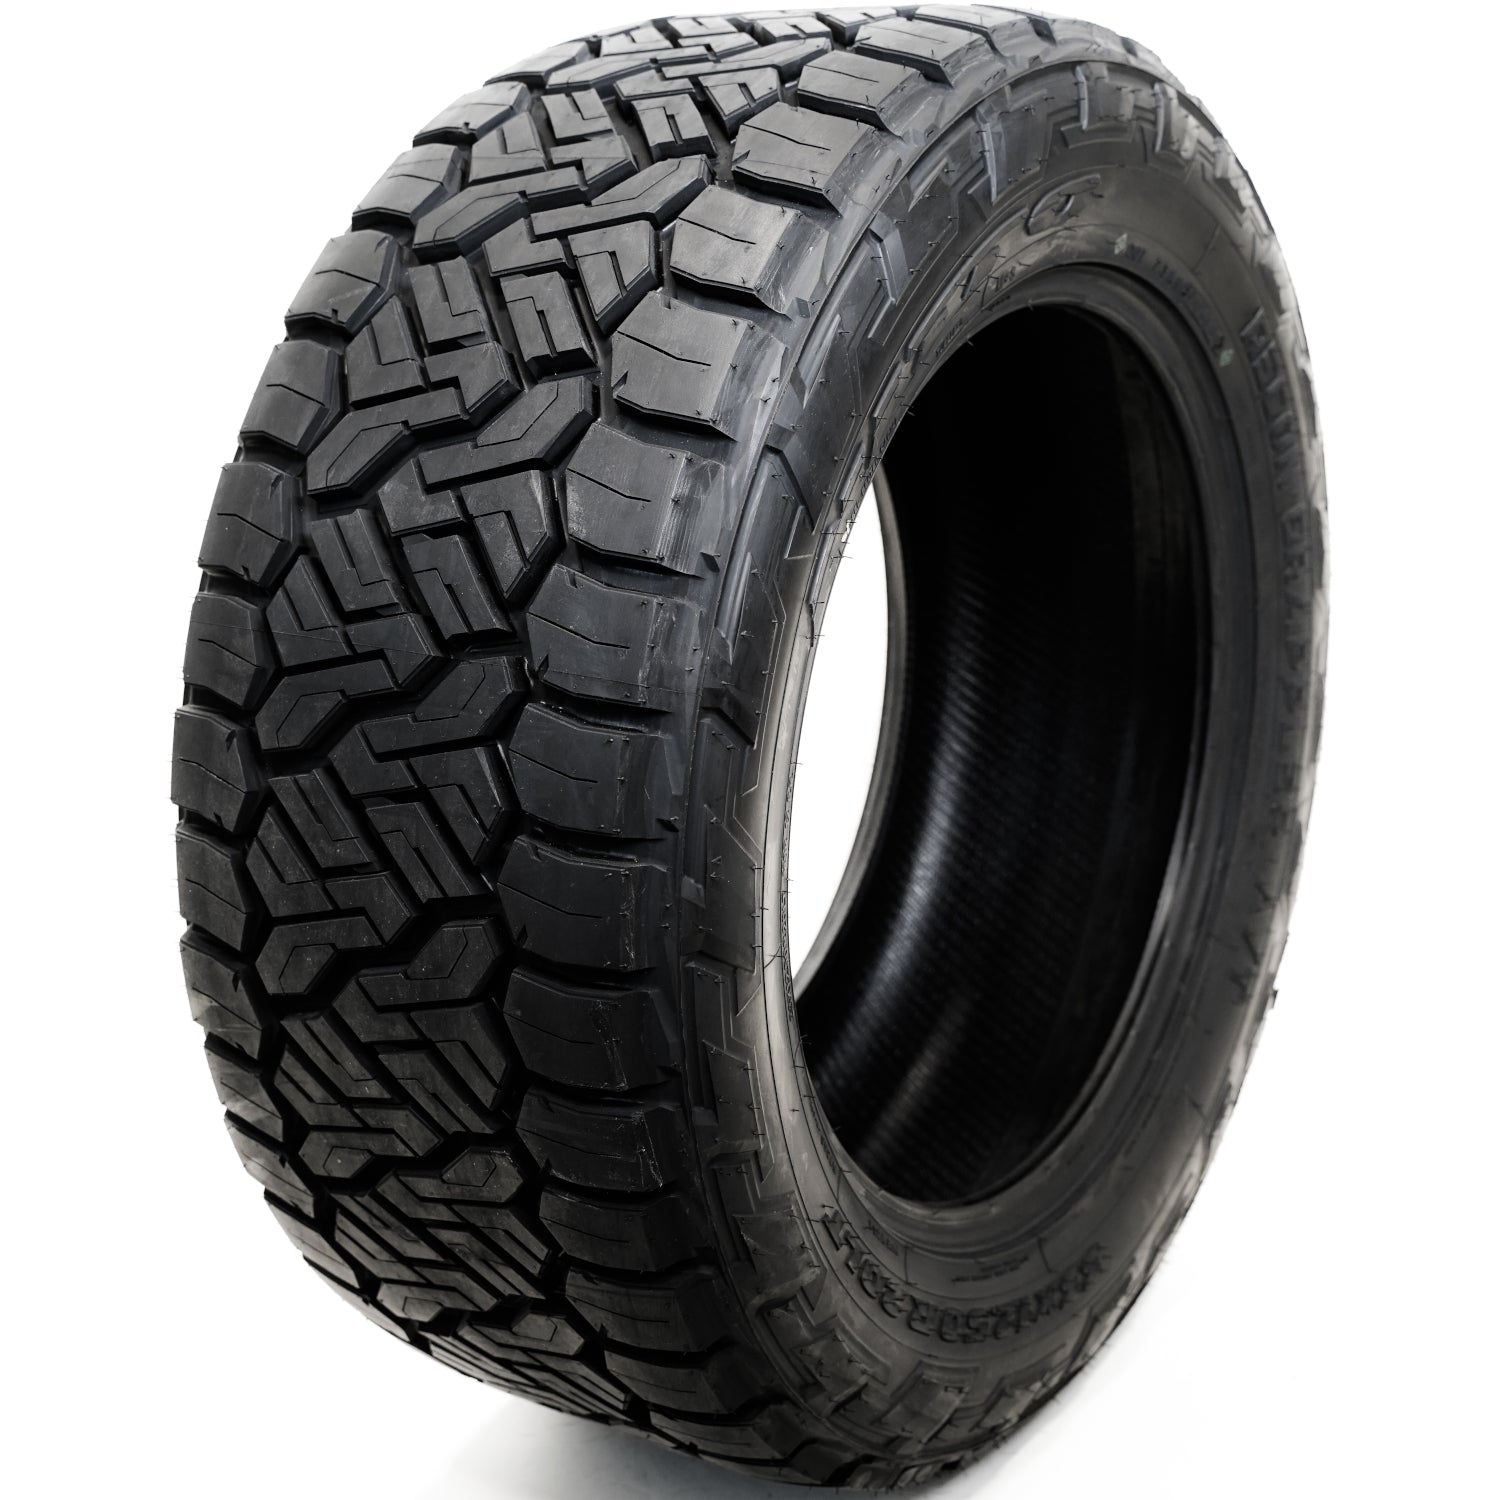 NITTO RECON GRAPPLER A/T LT325/45R24 (35.5X12.8R 24) Tires